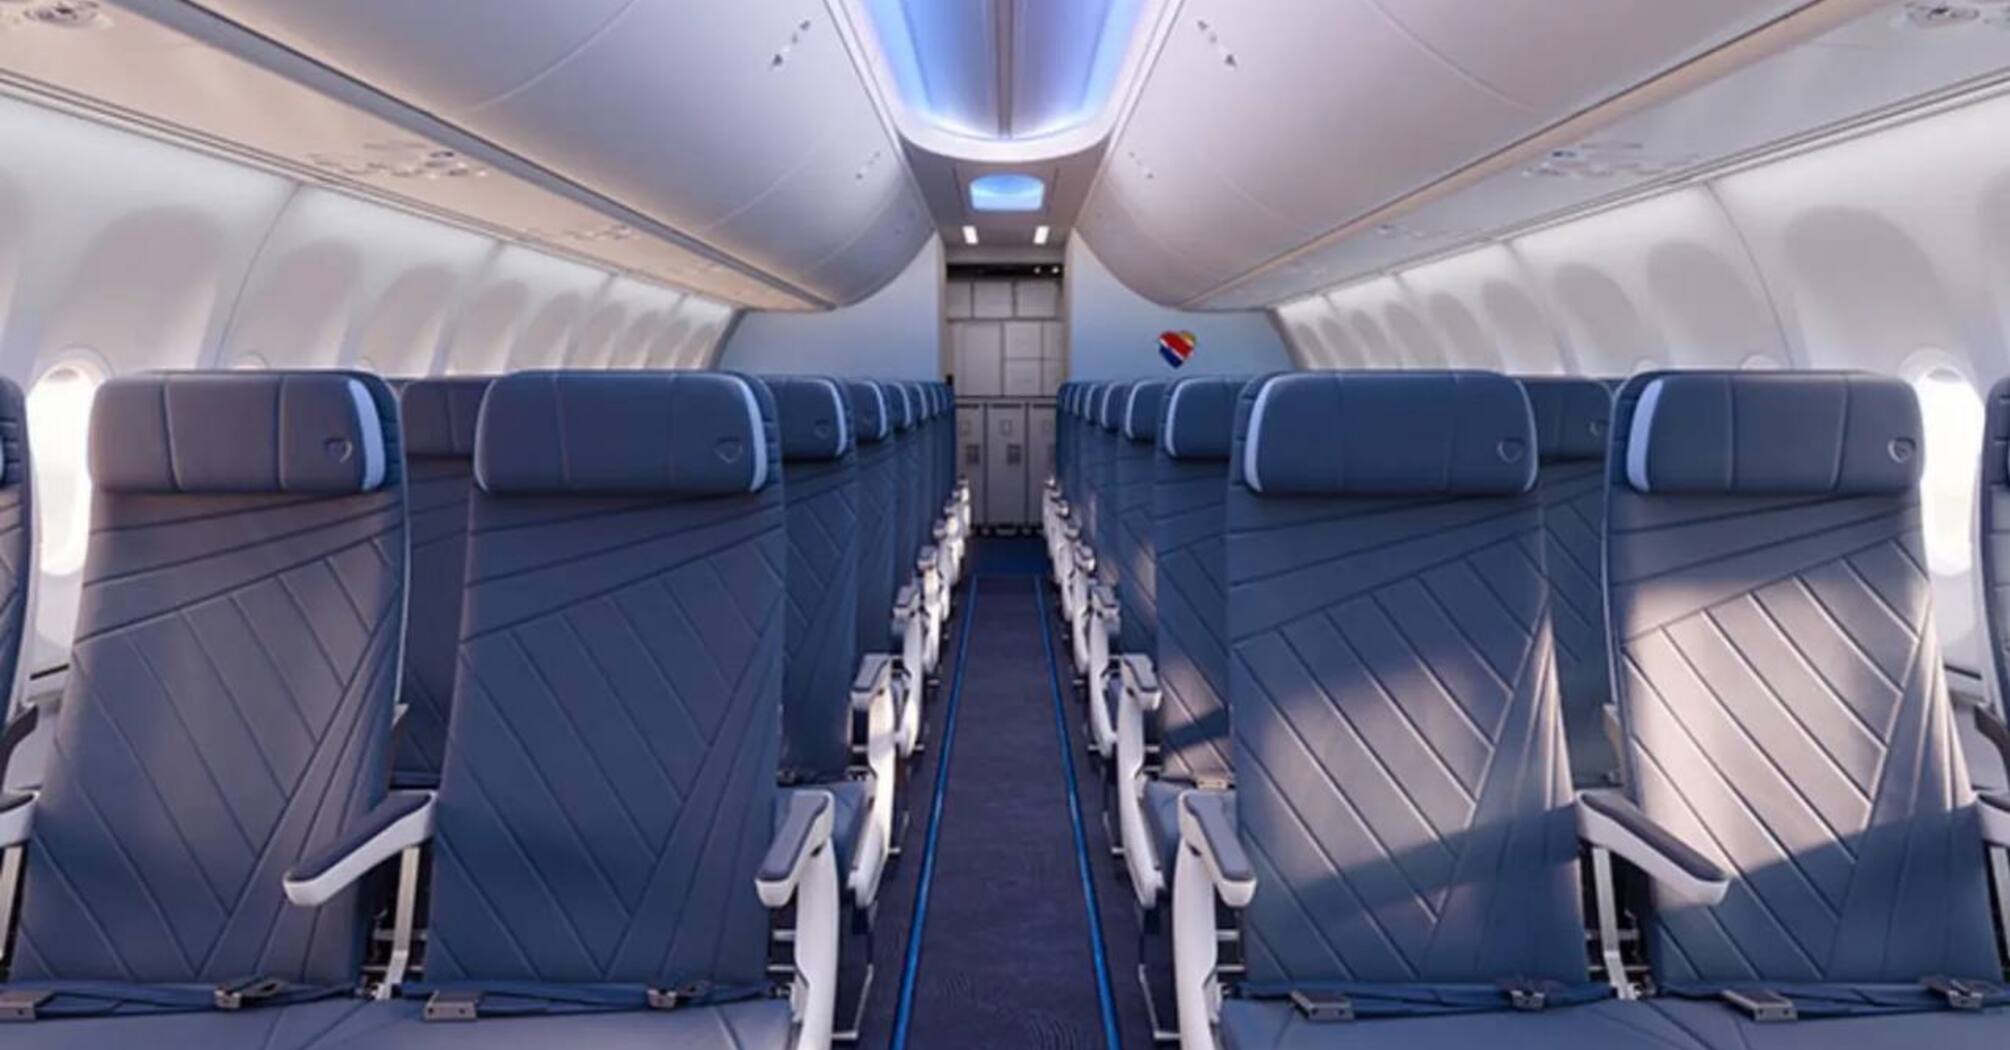 Southwest Airlines introduced new seats in the airplane cabin, and travelers already hate them